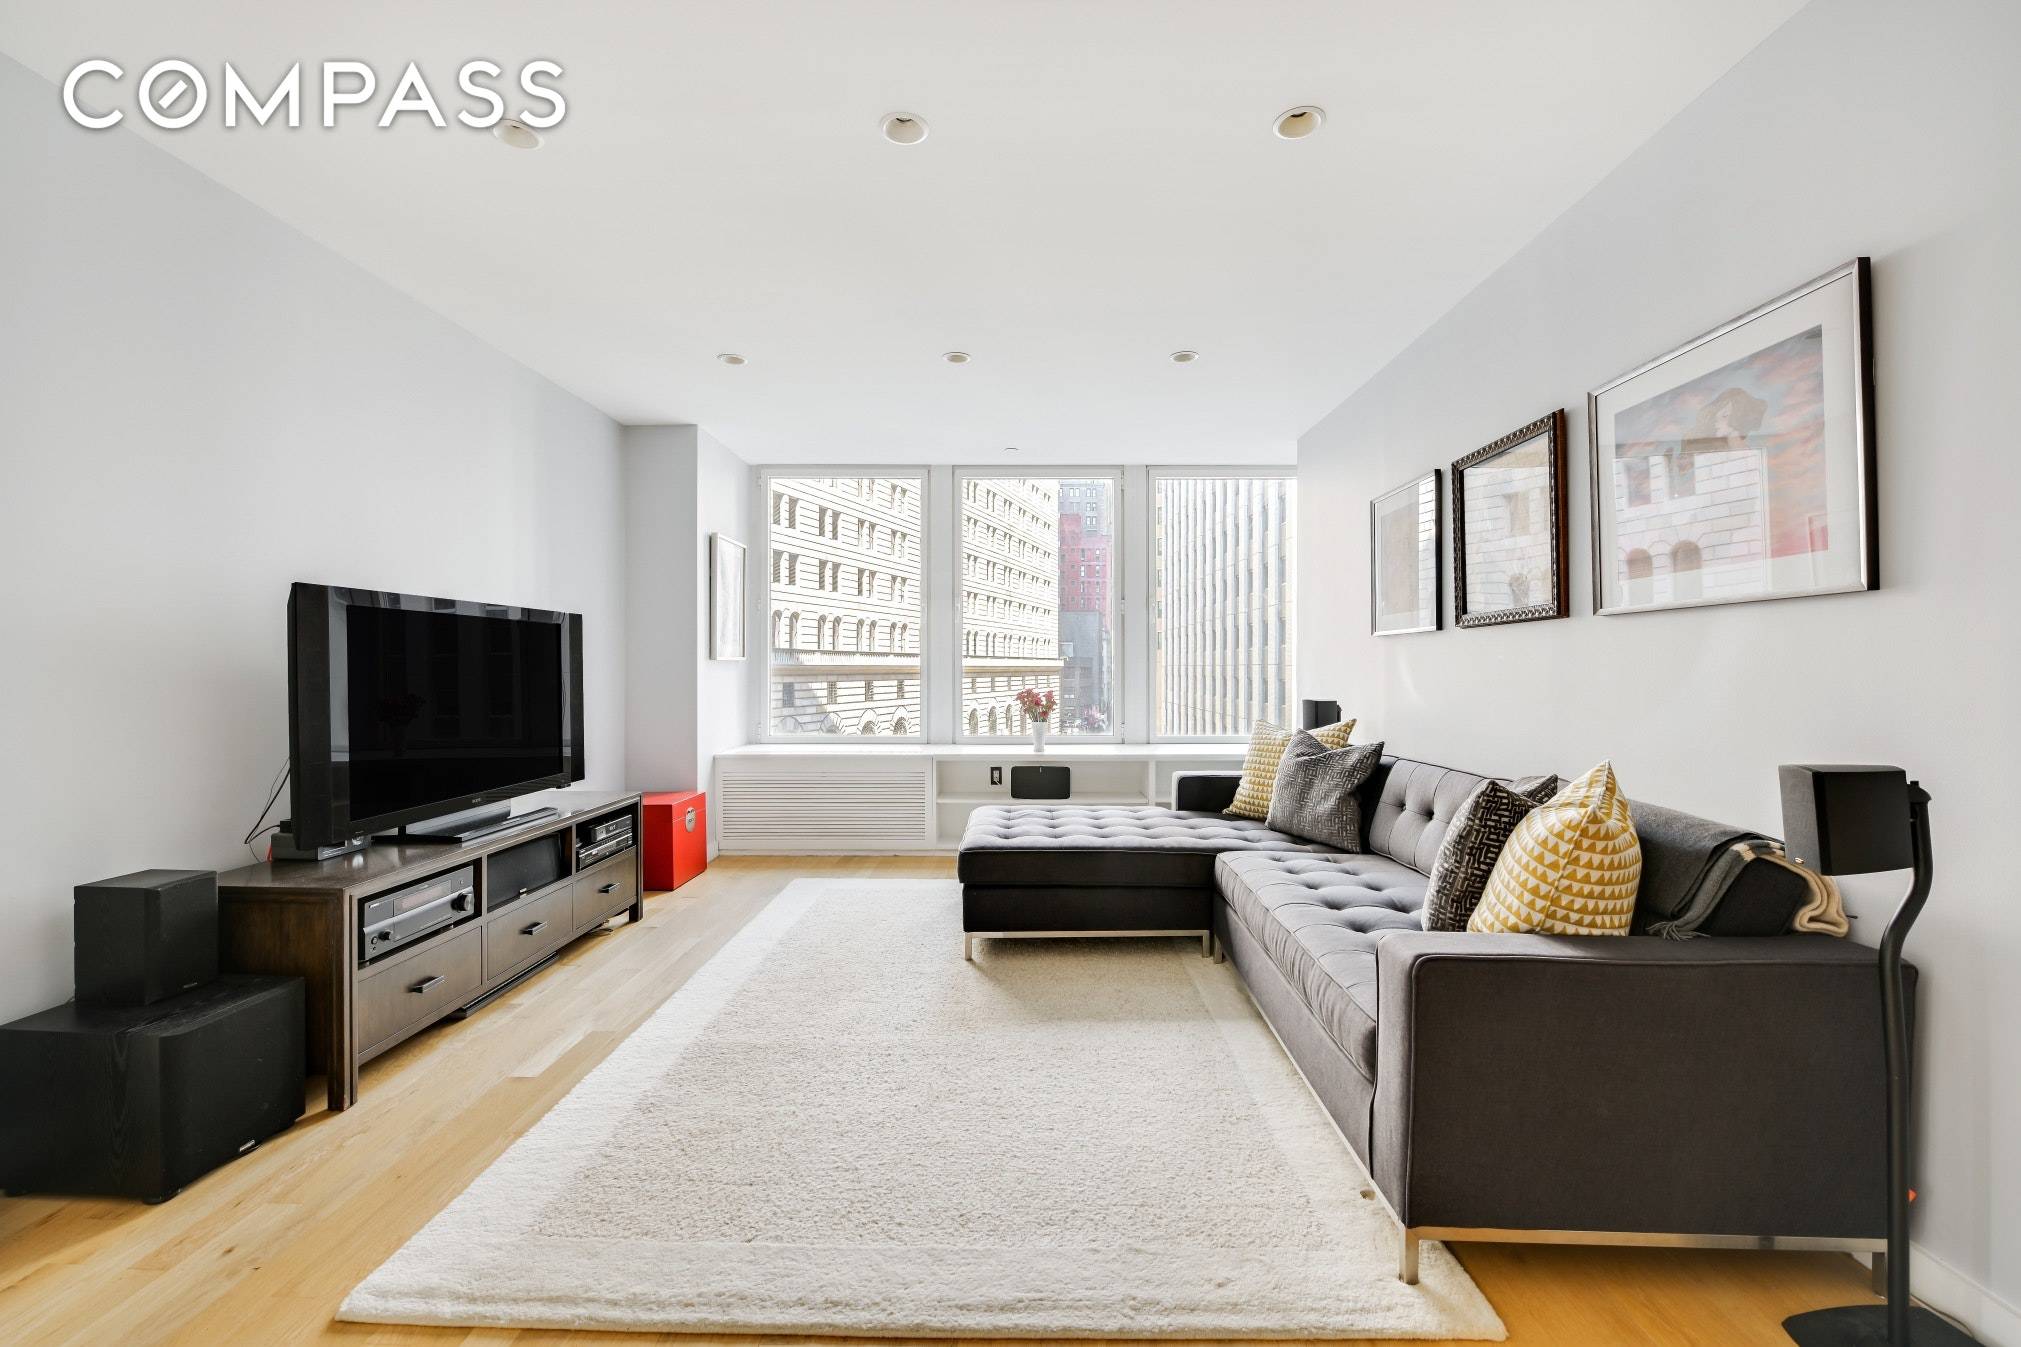 Surround yourself in stunning FiDi views in this spacious two bedroom, two bathroom home in an amenity rich, full service condominium.